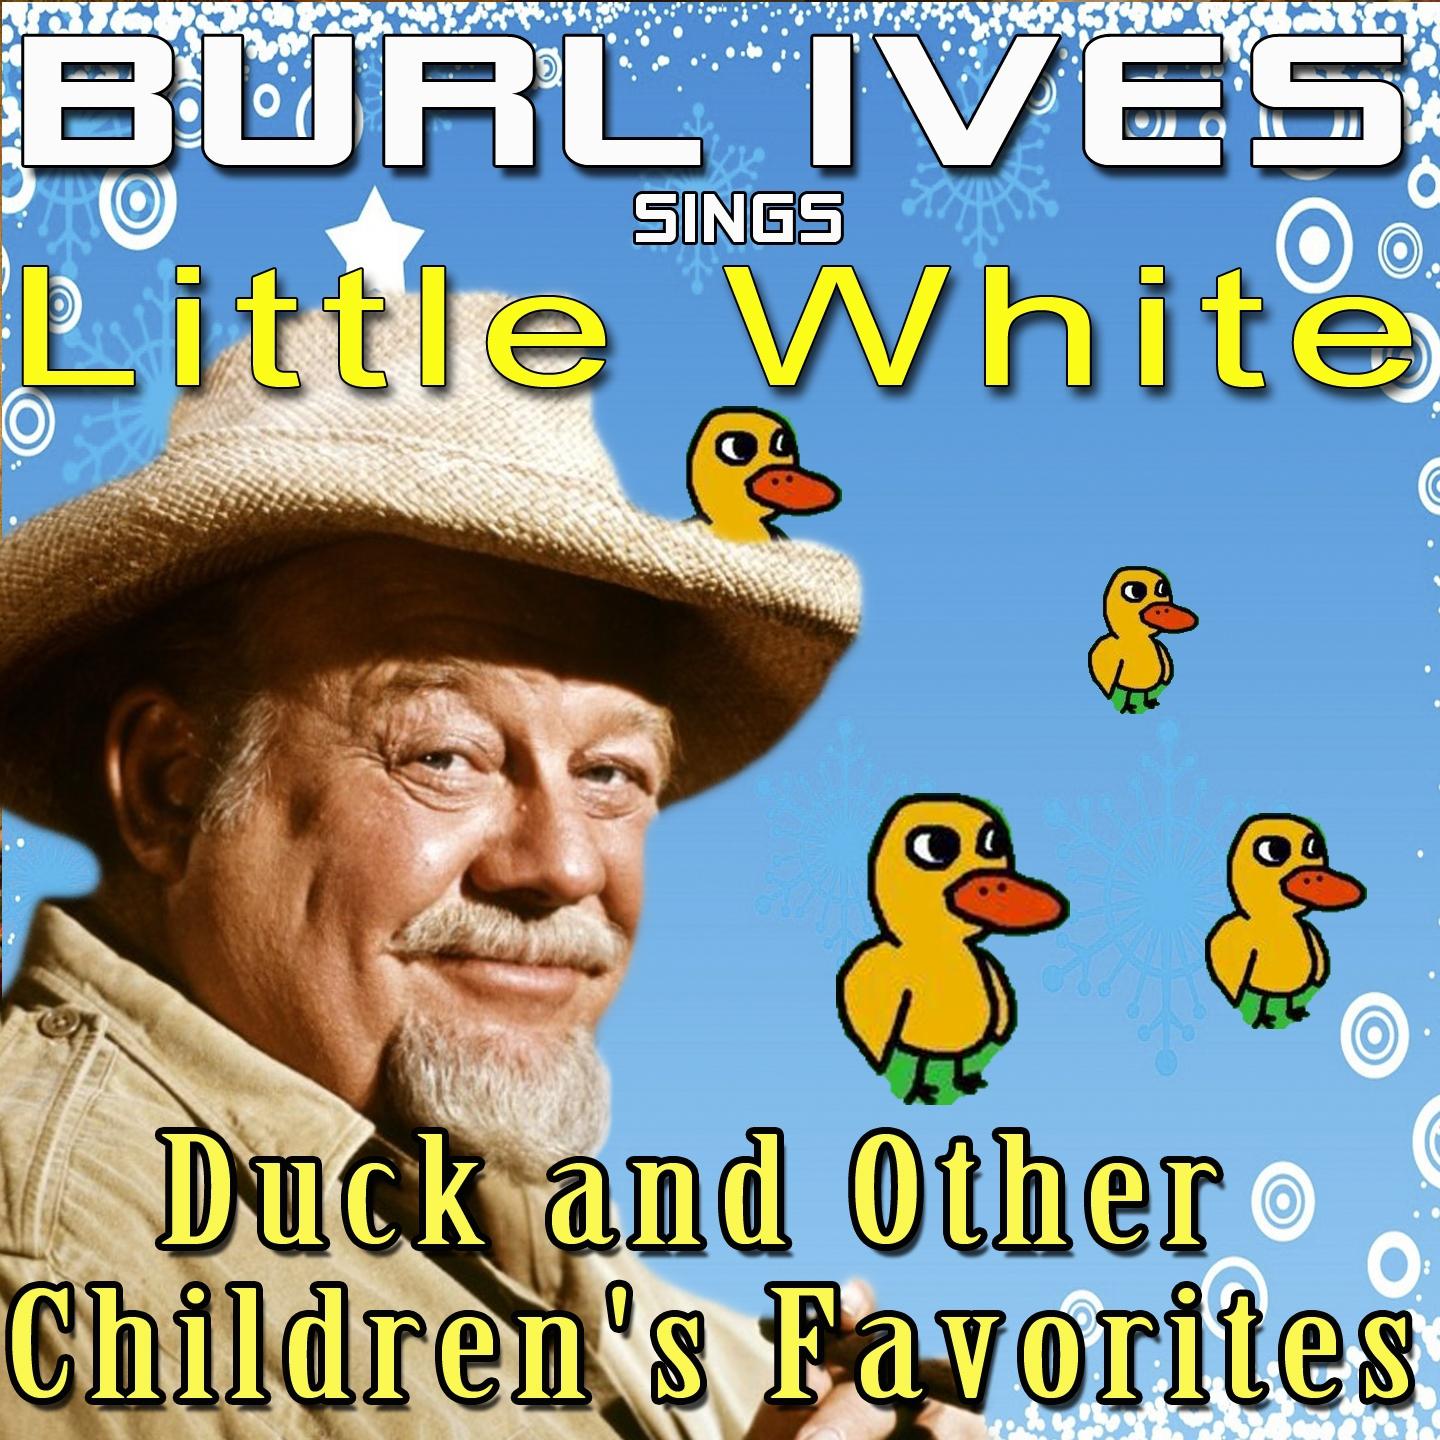 Burl Ives Sings Little White Duck and Other Children's Favorites